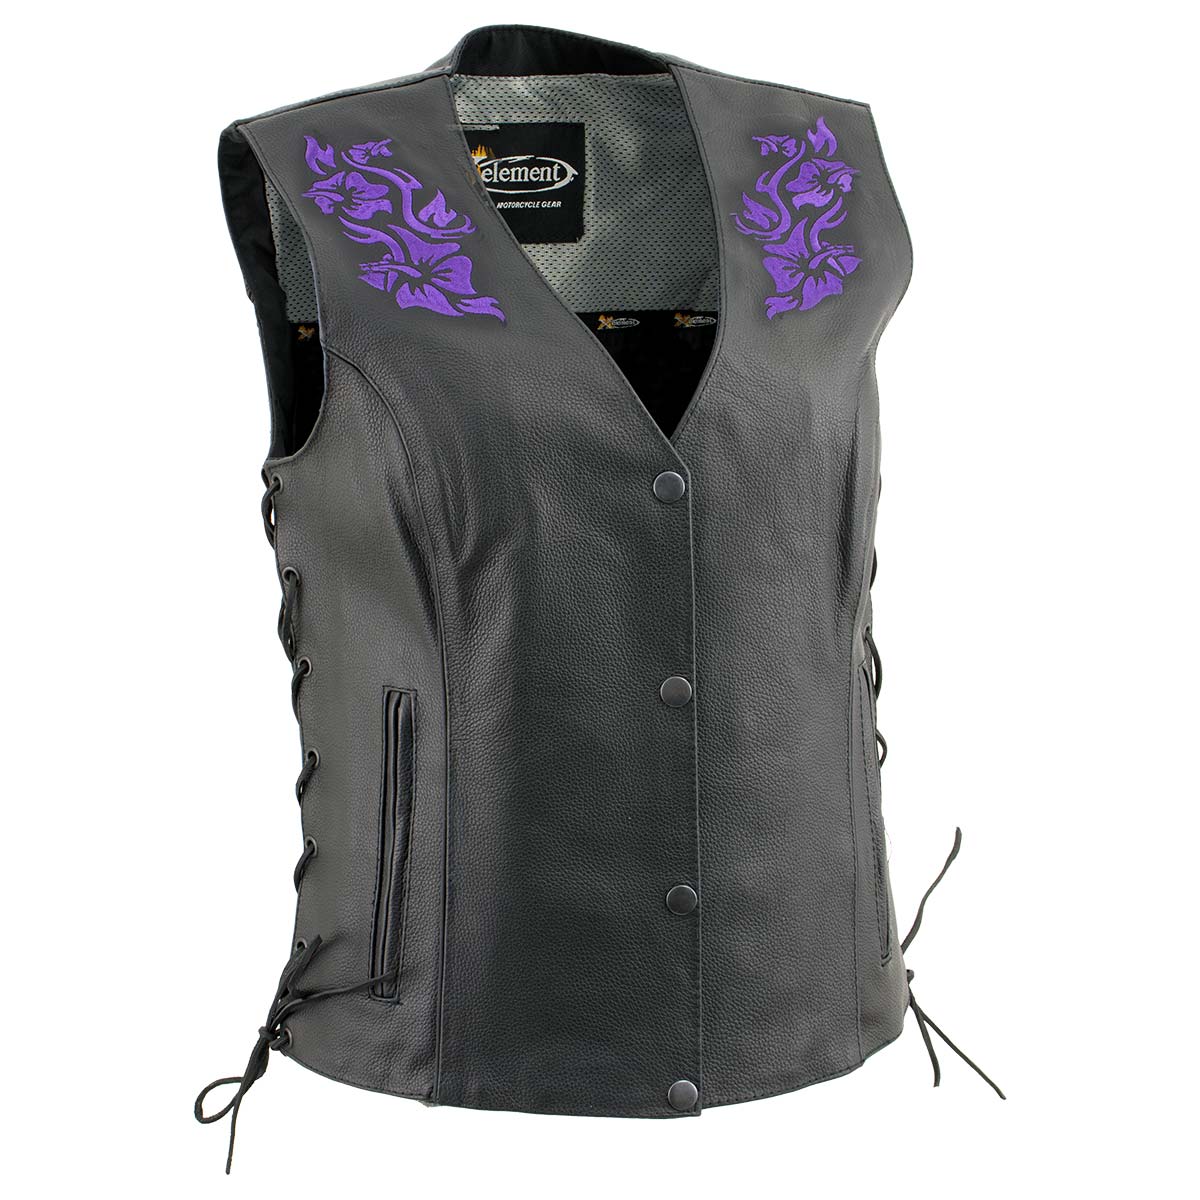 Xelement XS24005 Women's ‘Gemma’ Black and Purple Motorcycle Rider Leather Vest with Side Laces